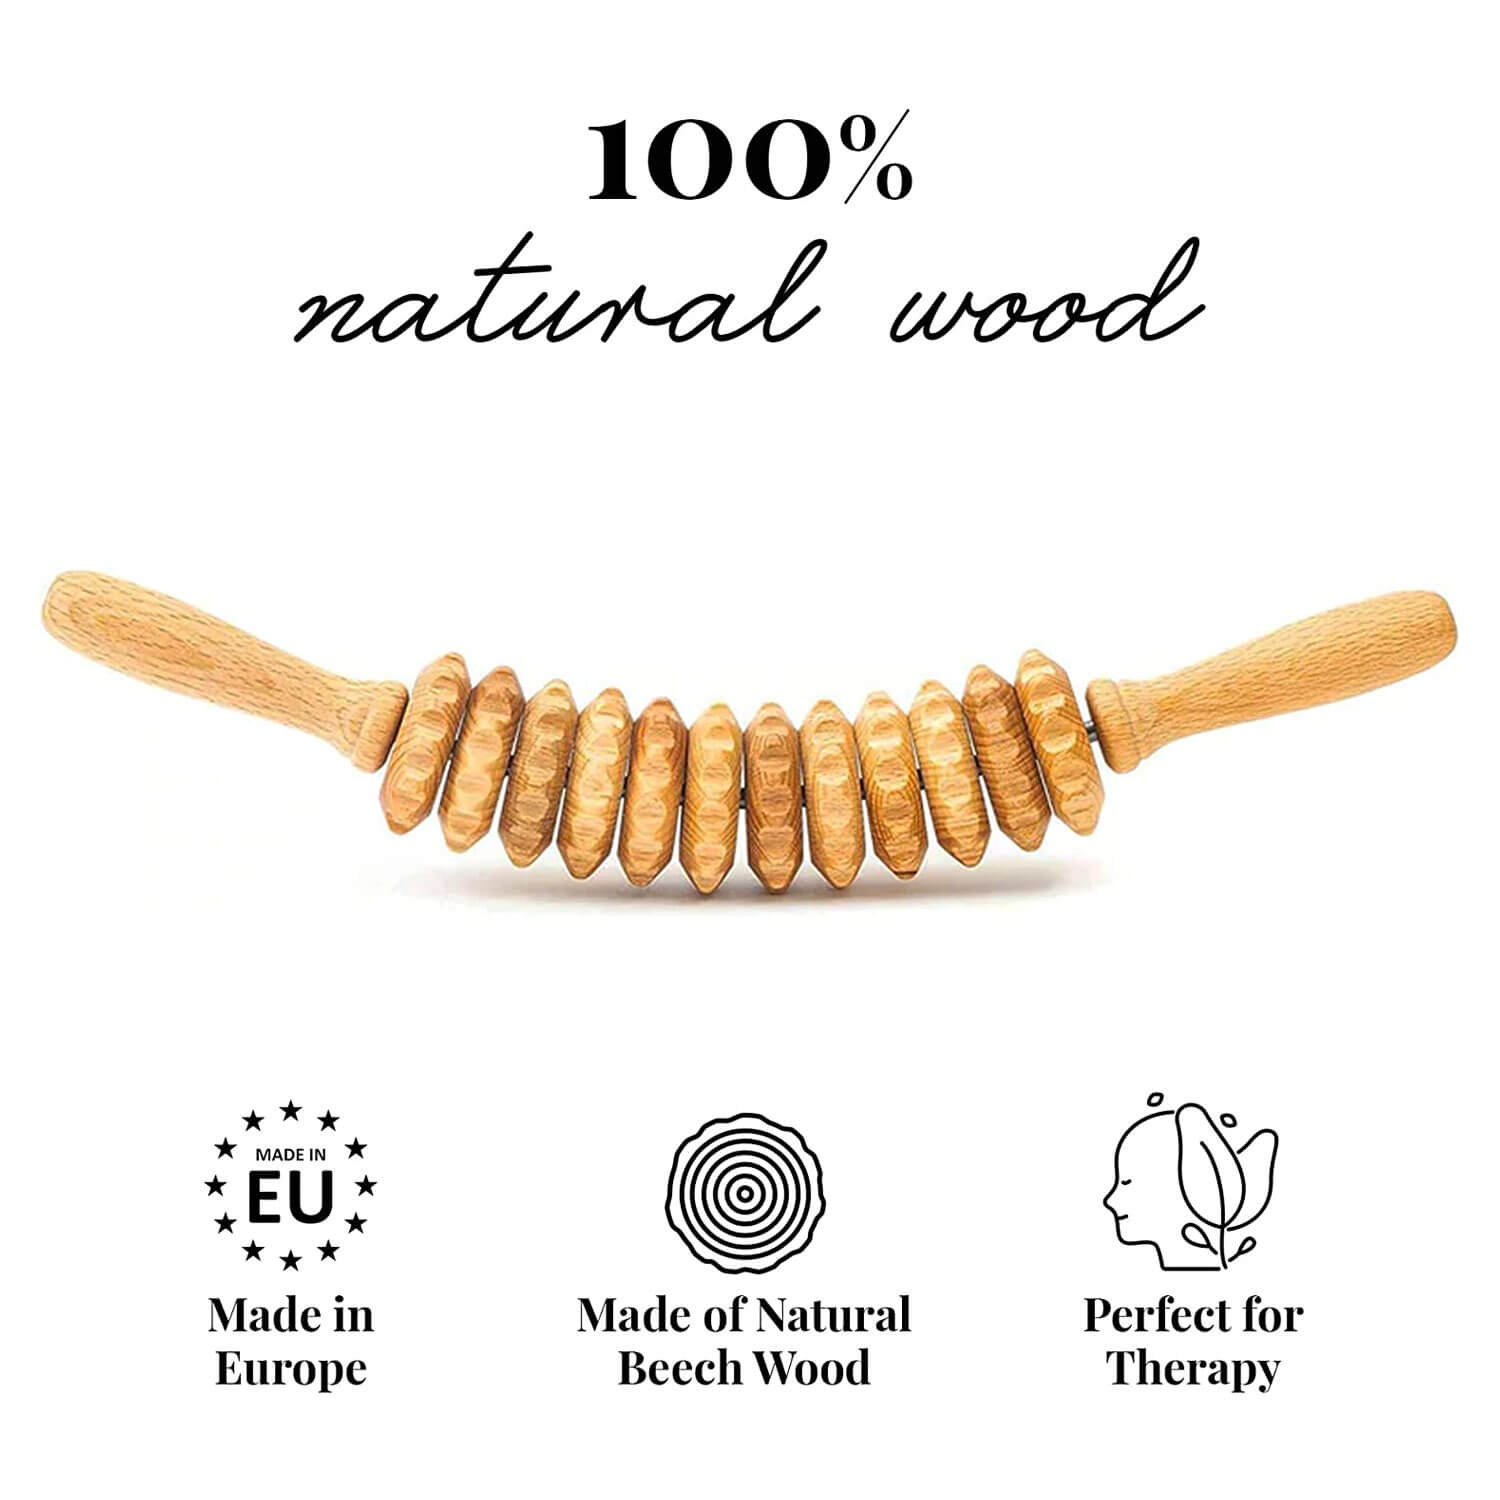 Handcrafted 100% Natural Wood Massager - Made in Europe